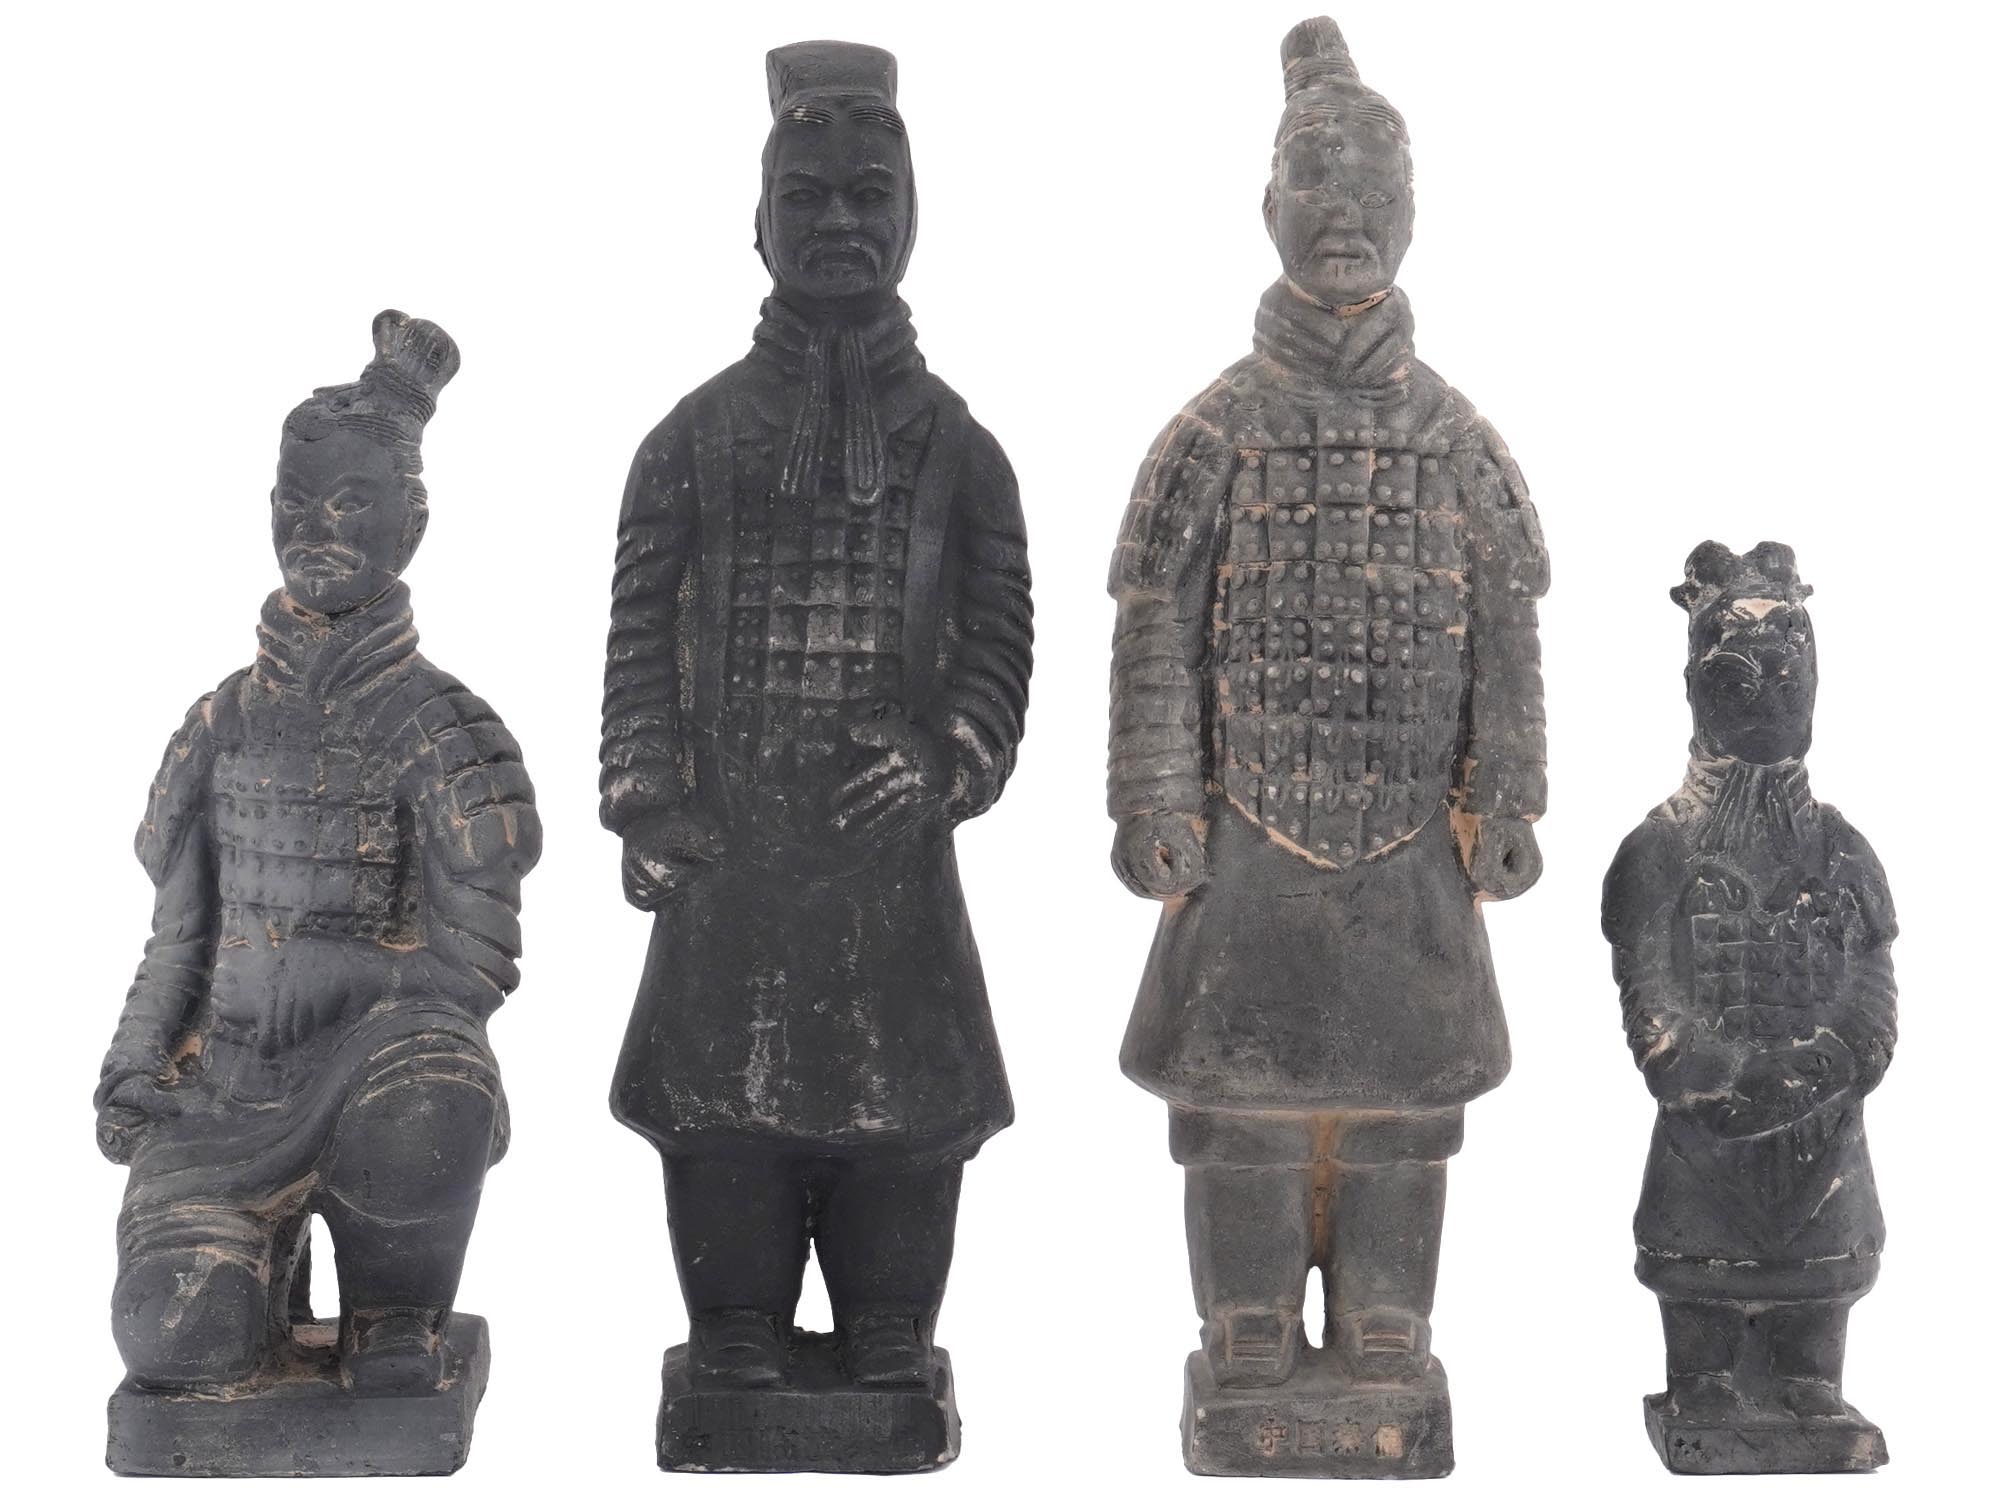 VINTAGE CHINESE TERRACOTTA ARMY SOLDIER FIGURINES PIC-0